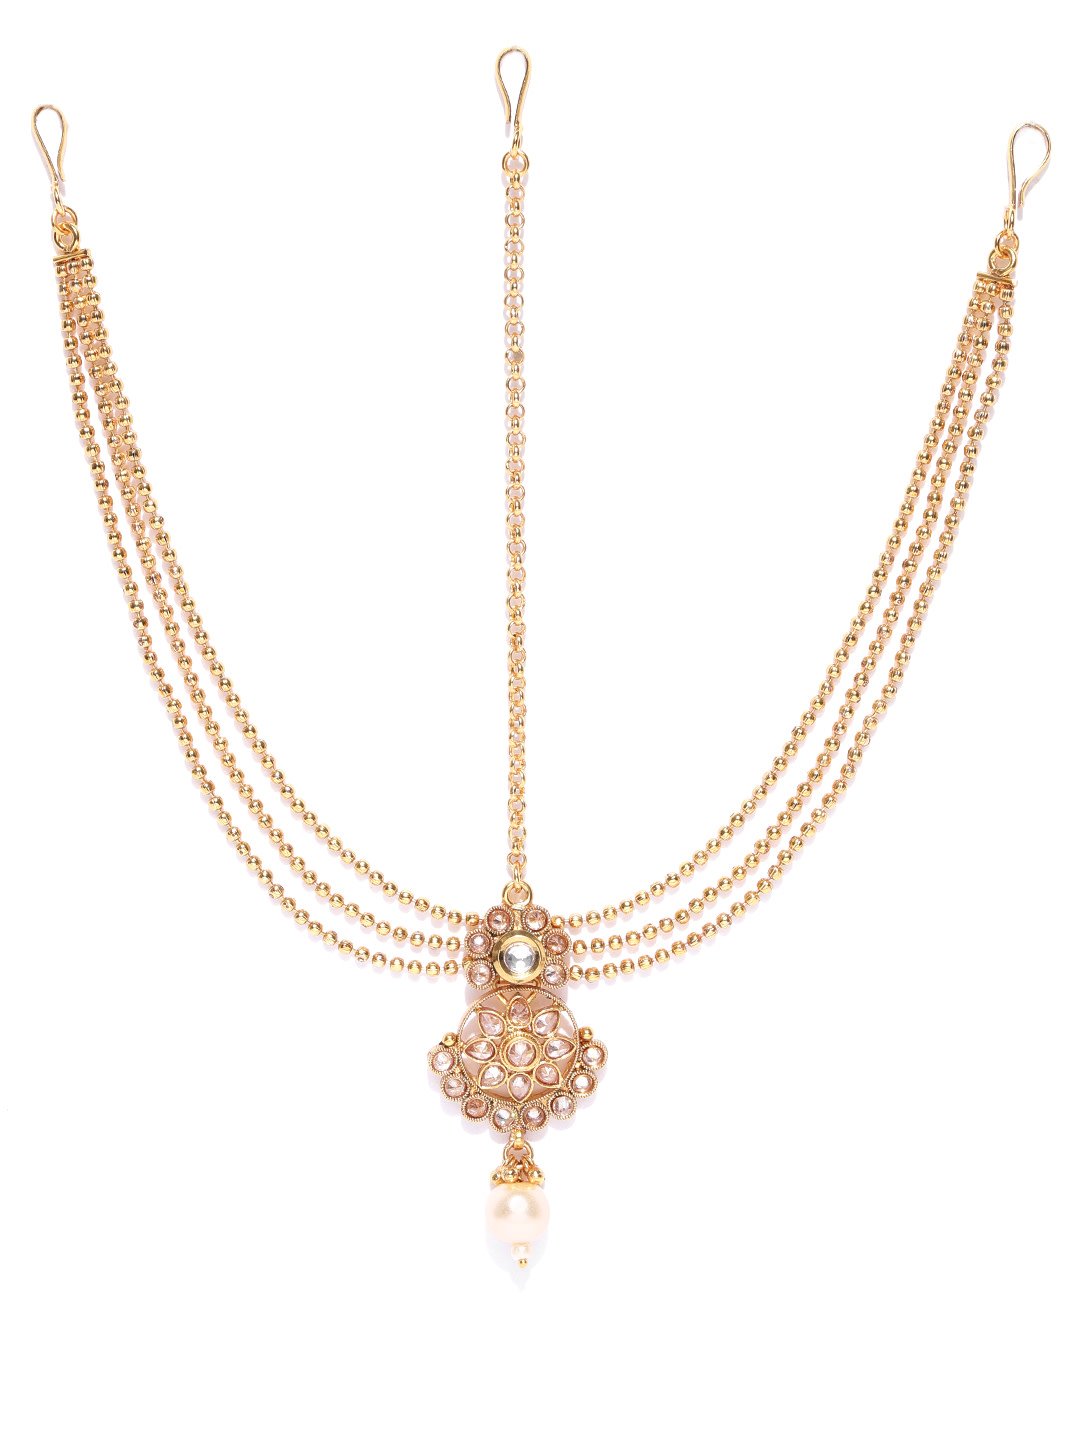 Women's Exclusive Gold Plated Maathapatti with Gold Bead Chain For Women And Girls - Priyaasi